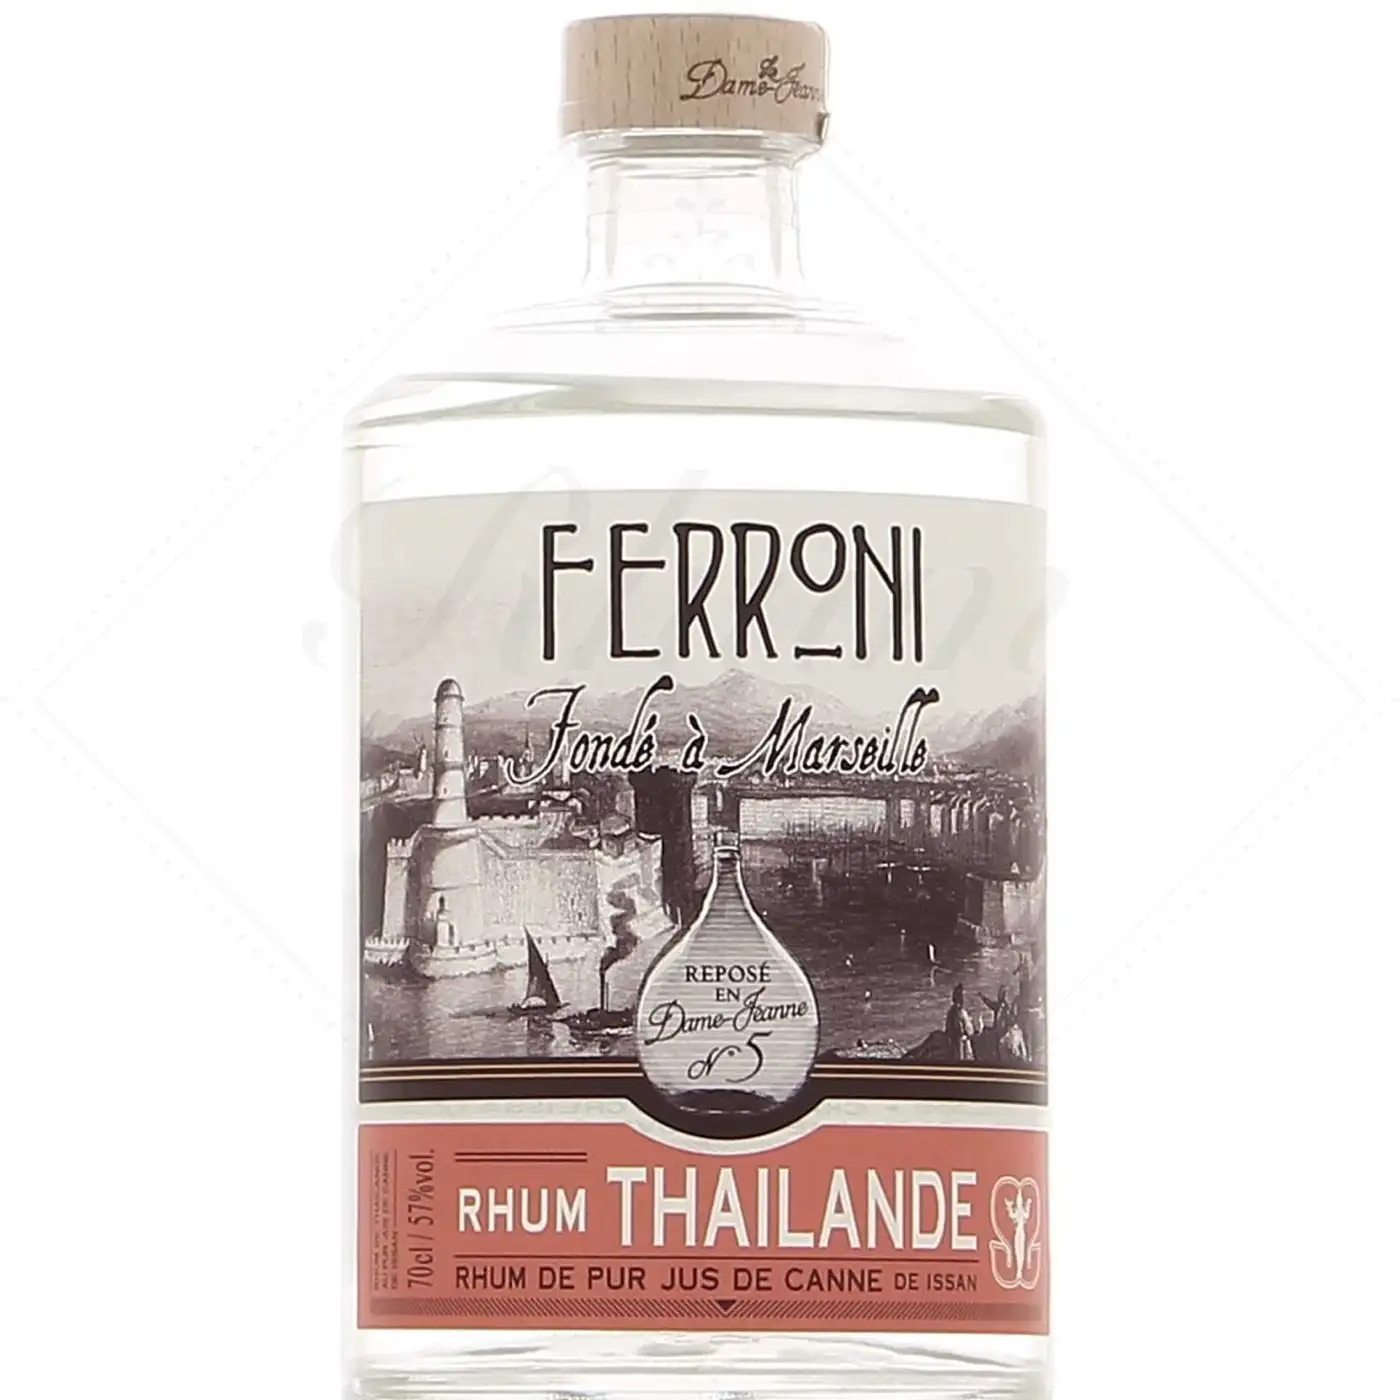 Image of the front of the bottle of the rum La Dame Jeanne 5 Rhum Thailande